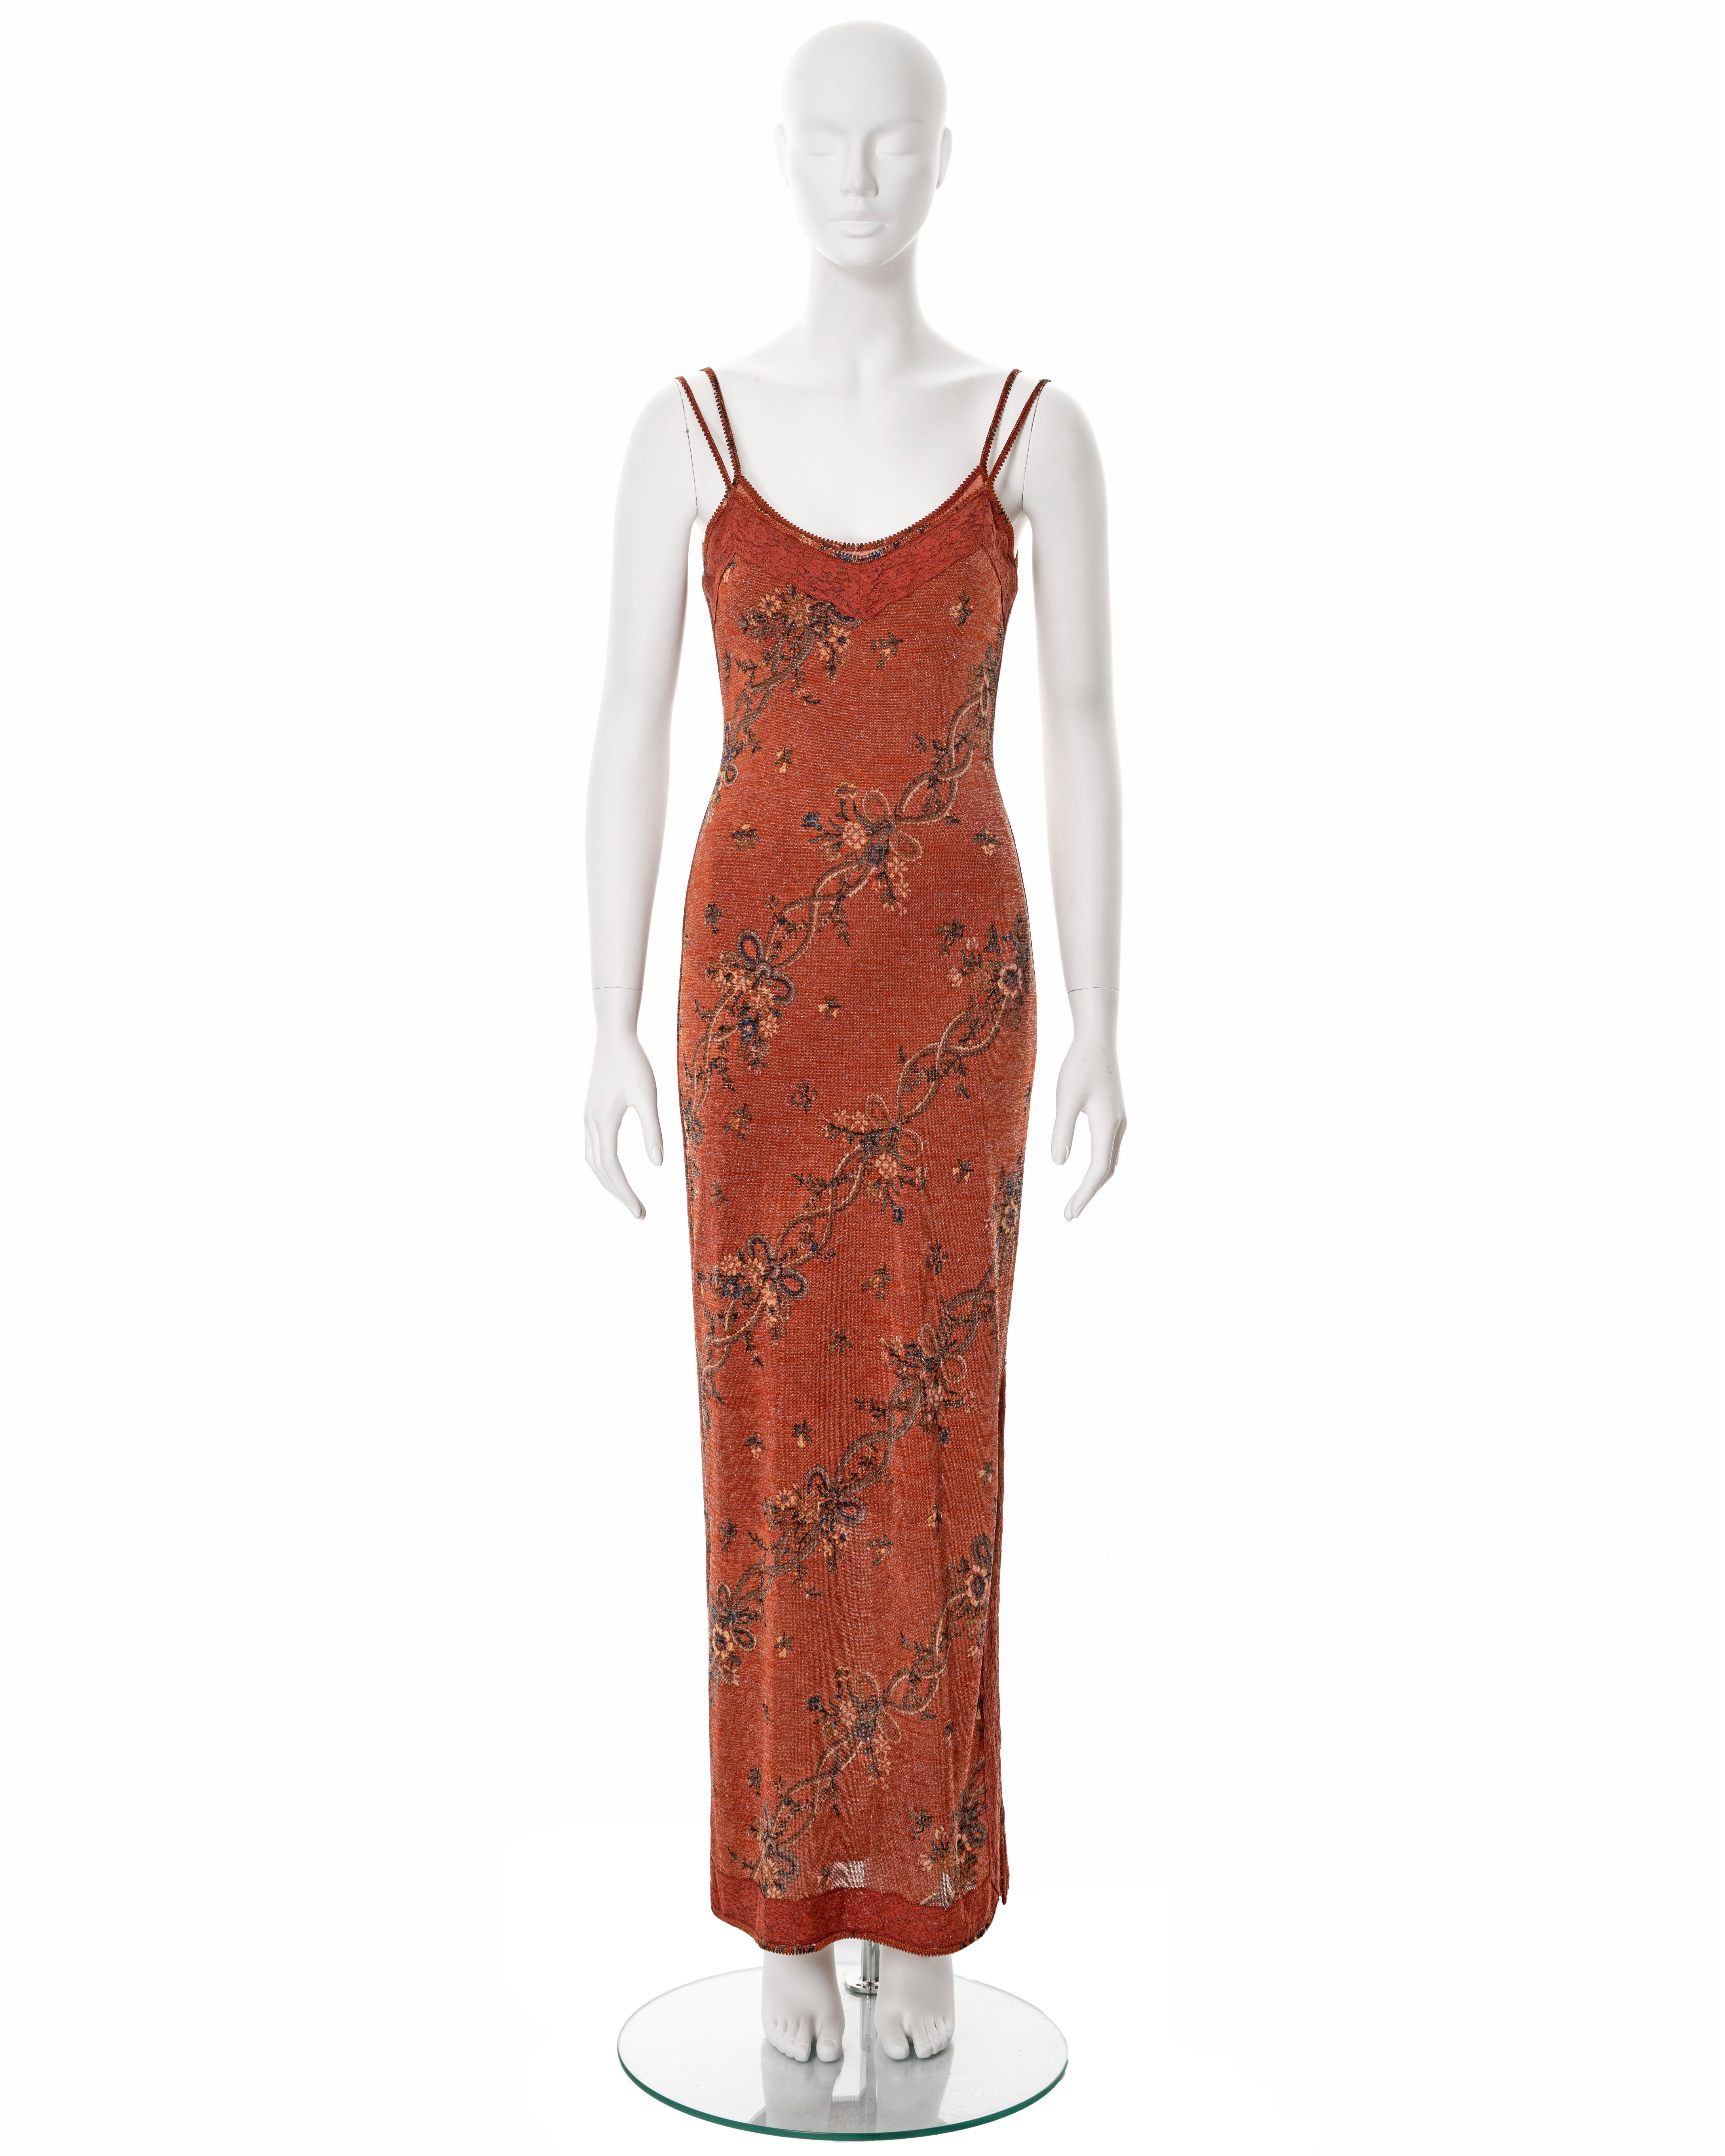 ▪ John Galliano maxi dress
▪ Sold by One of a Kind Archive
▪ Fall-Winter 2000
▪ Constructed from metallic copper viscose knit with floral motifs 
▪ Chantilly lace trim
▪ Double-layered
▪ Four spaghetti straps 
▪ Floor-length skirt with leg slit at